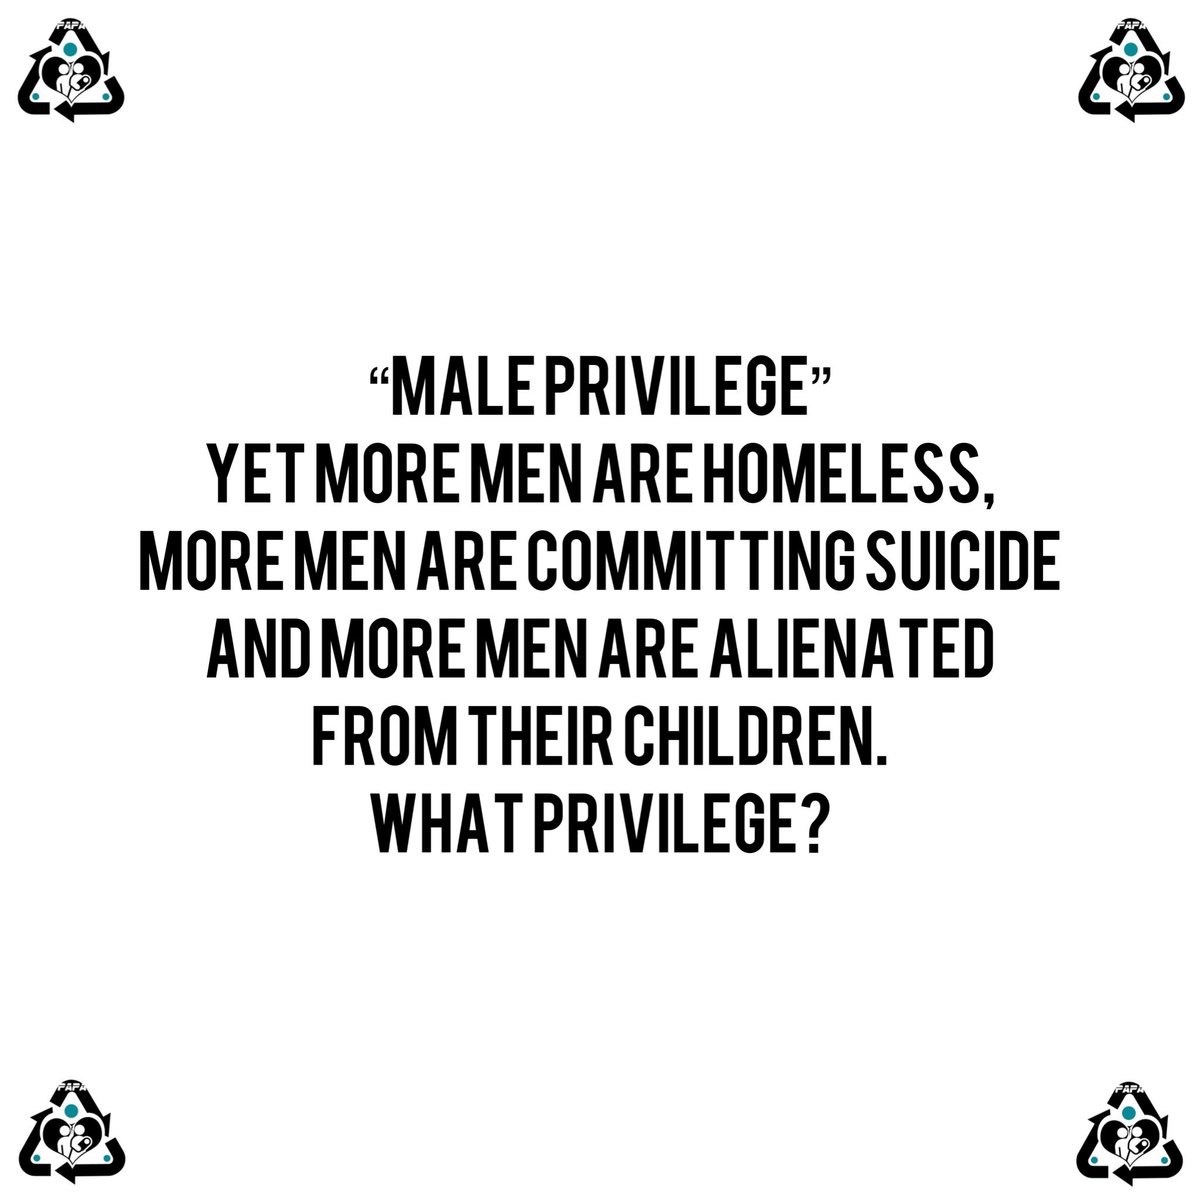 Collectively we need to do more to dispel the myth of “male privilege”. Do you agree?

#papa #peopleagainstparentalalienation #parentalalienation #familylaw #familycourt #fathersrights #maleprivilege